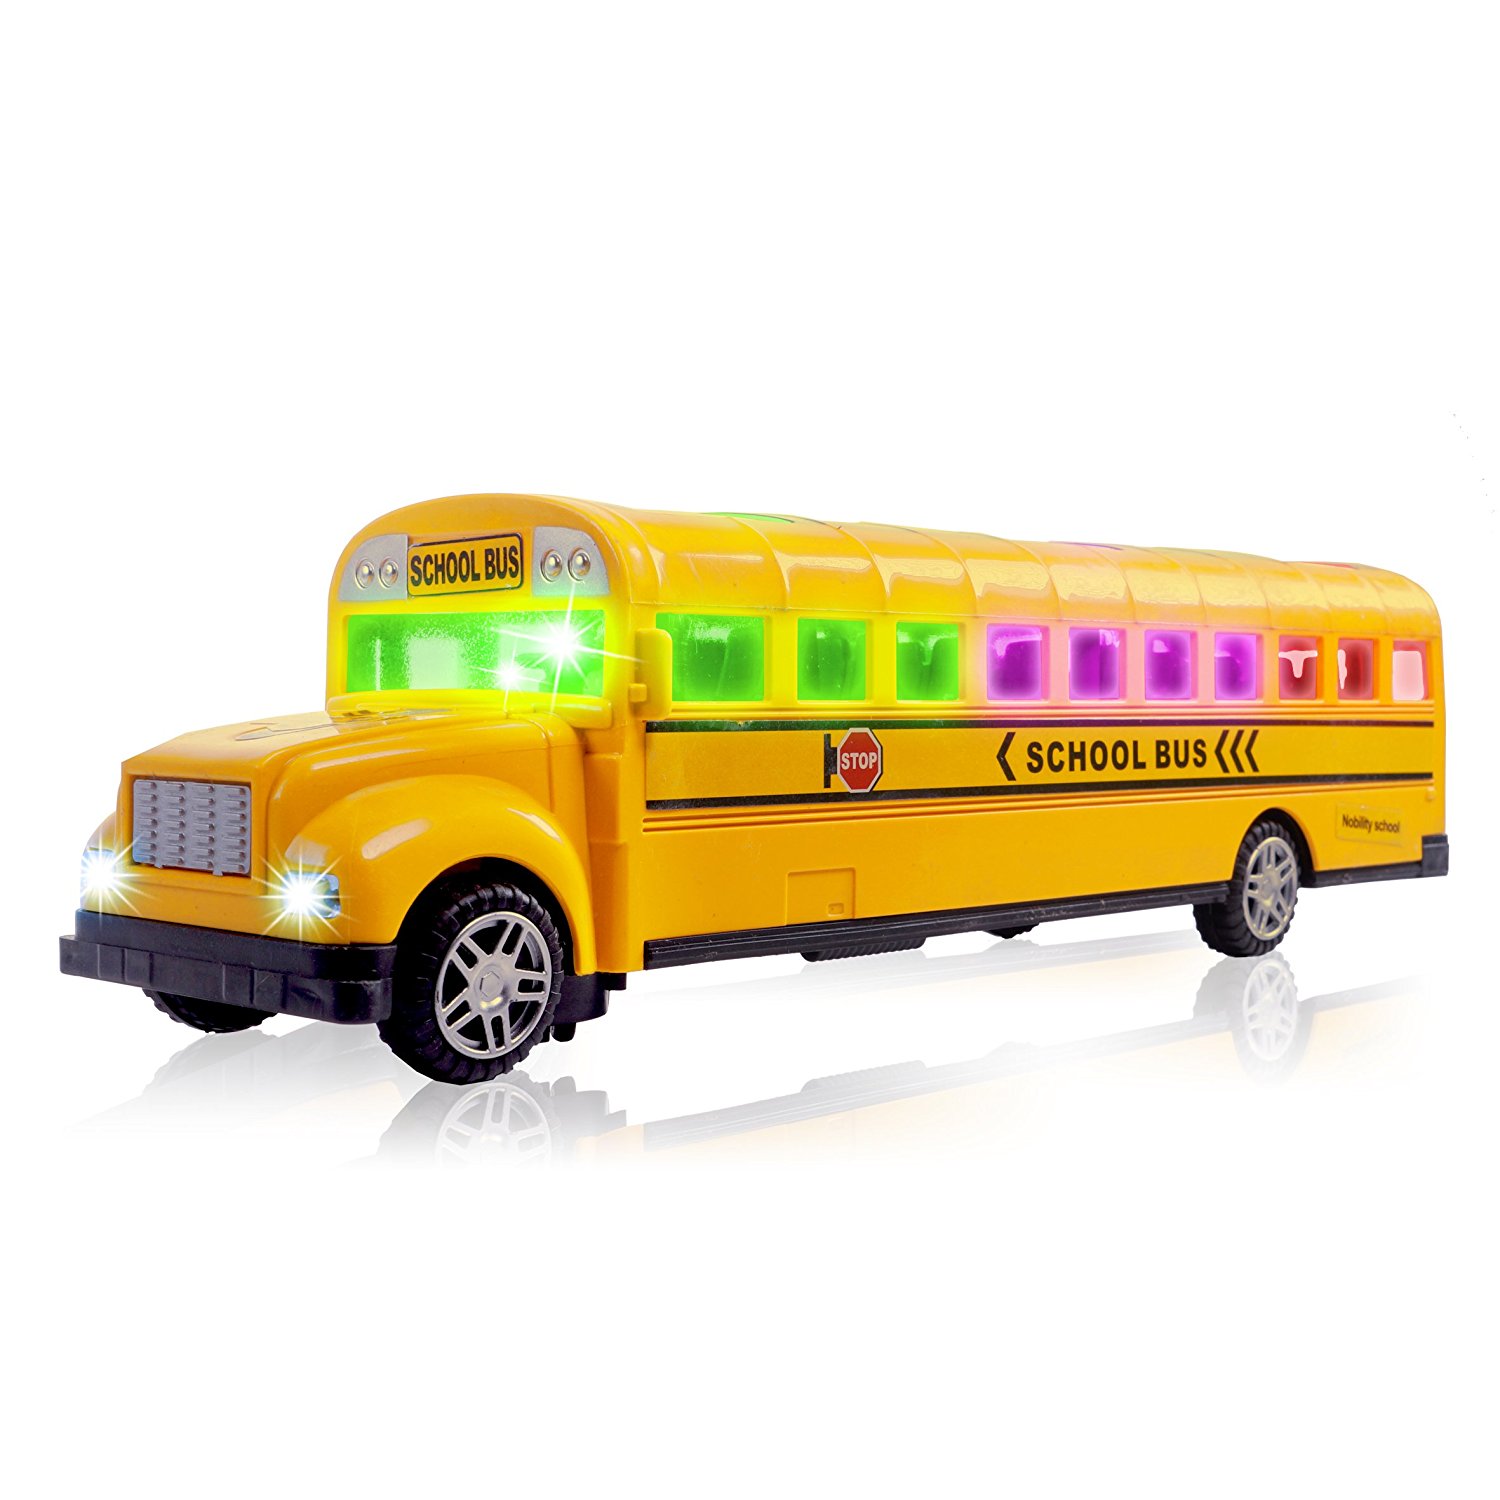 Details about   School Bus Toy Cars Vehicles Alloy Models with Sounds and Lights for Kids 